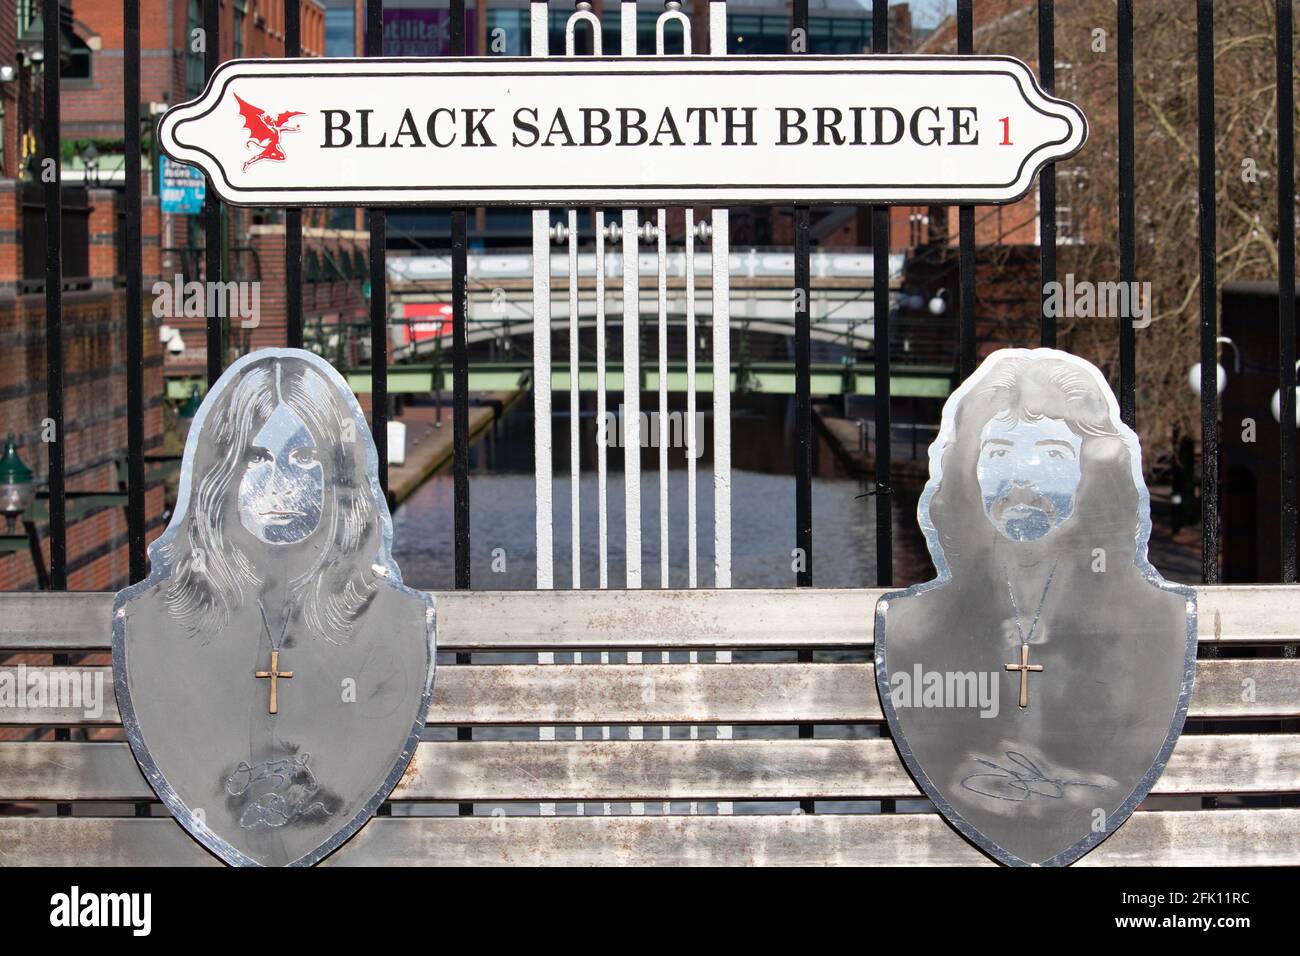 The bridge on Broad Street, Birmingham, renamed the Black Sabbath Bridge after the music rock group Black sabbath who were formed in the City. The bridge has a seat where you can sit alongside members of the band. Stock Photo